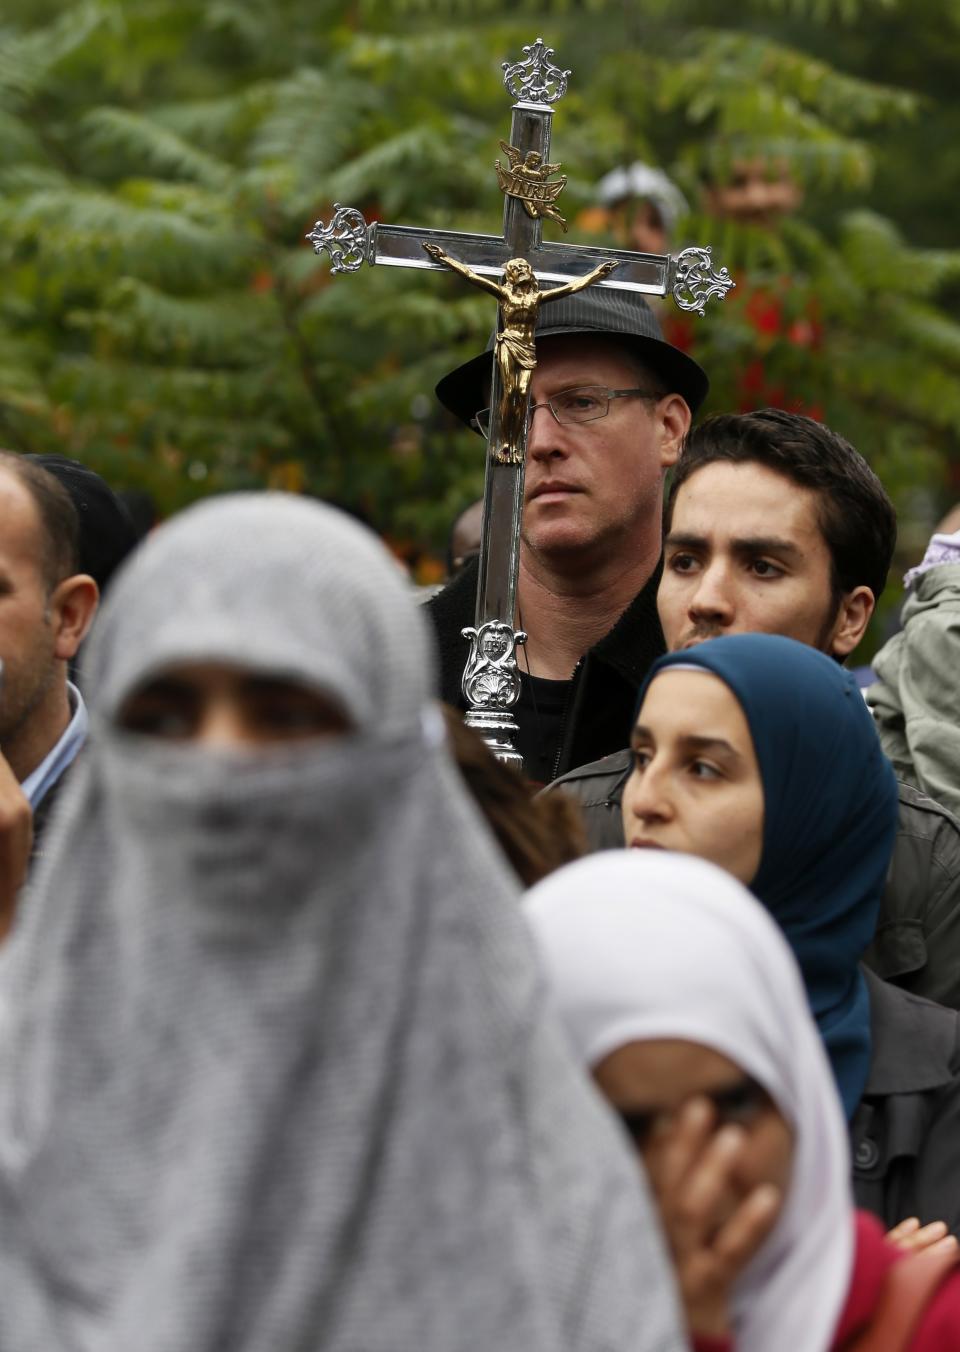 A man carries a cross during a protest against Quebec's proposed Charter of Values in Montreal, September 14, 2013. Thousands took to the streets to denounce the province's proposed bill to ban the wearing of any overt religious garb by government paid employees. REUTERS/ Christinne Muschi (CANADA - Tags: POLITICS CIVIL UNREST)